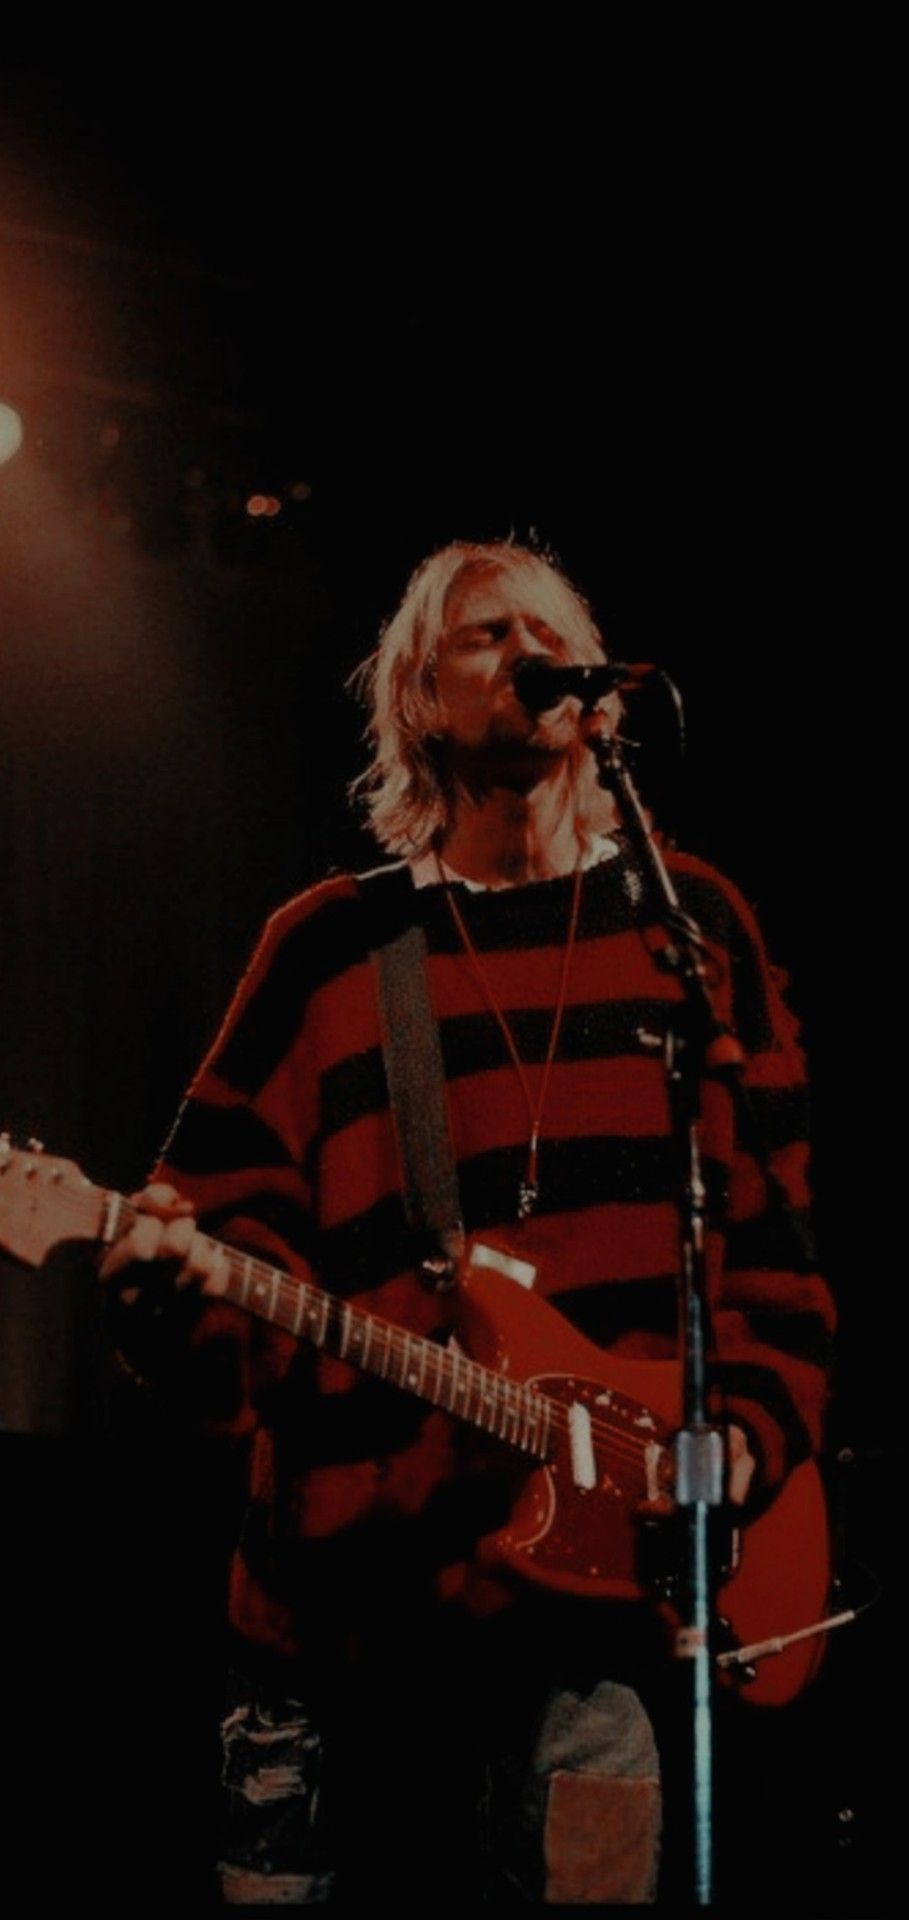 100+] Cobain Pictures | Wallpapers.com